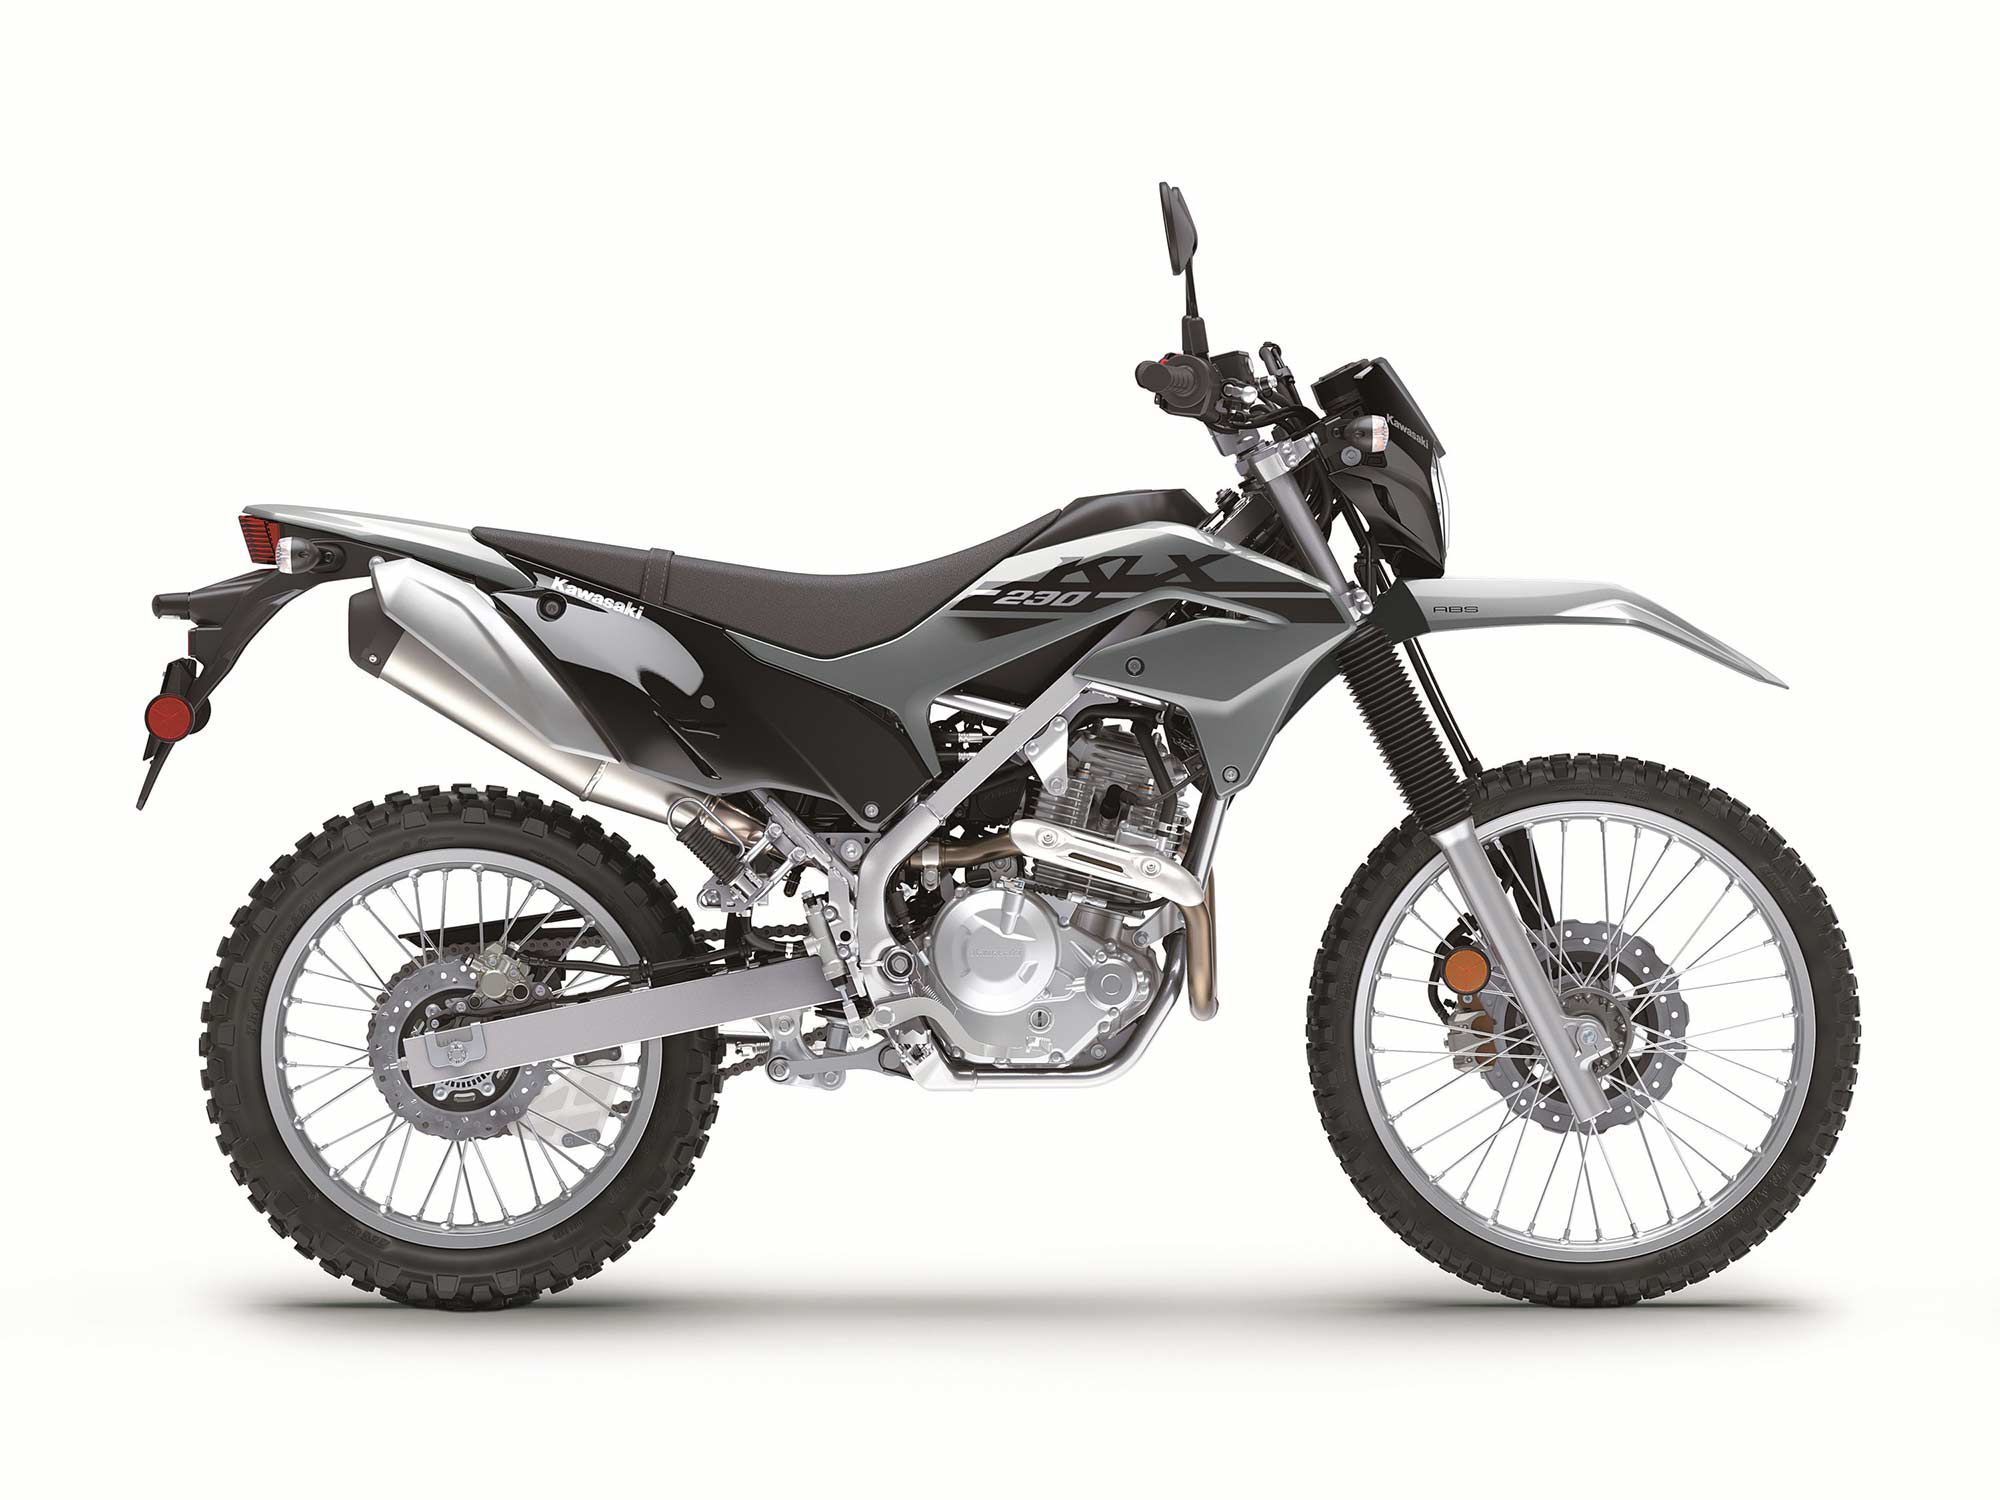 The base KLX230 only comes in Battle Gray.